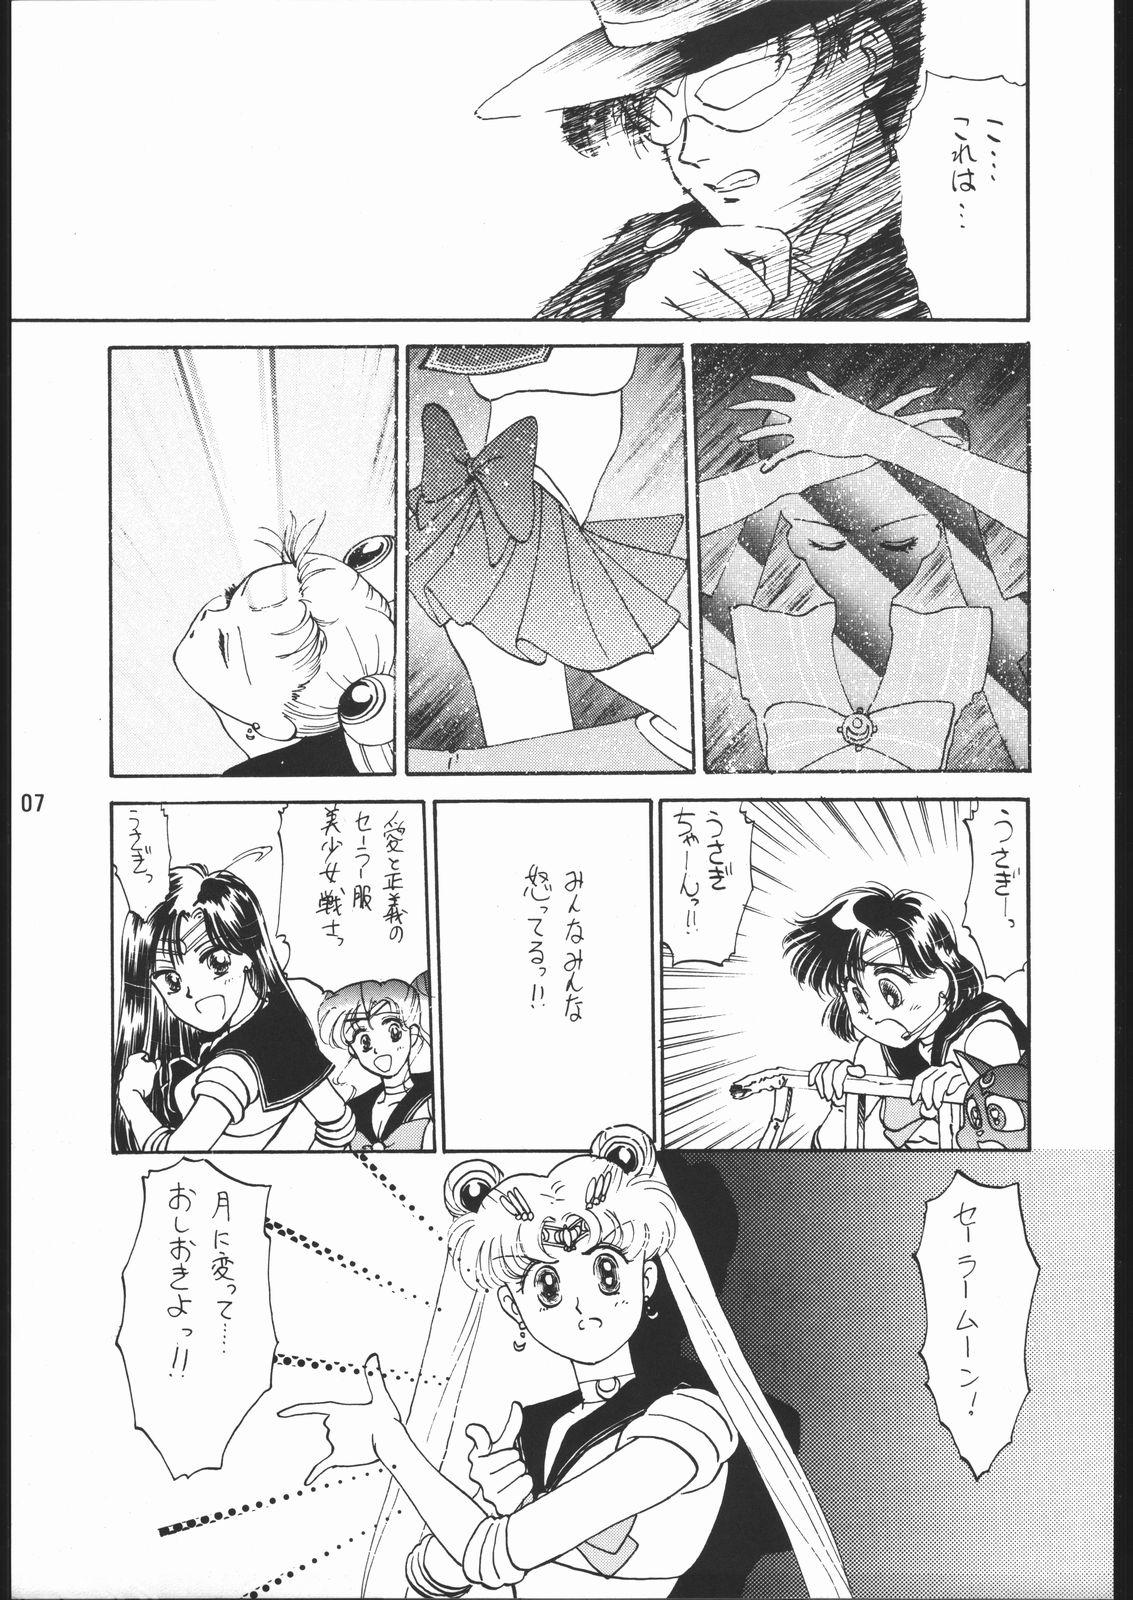 First Time うさぎがピョン!! - Sailor moon Indonesian - Page 6